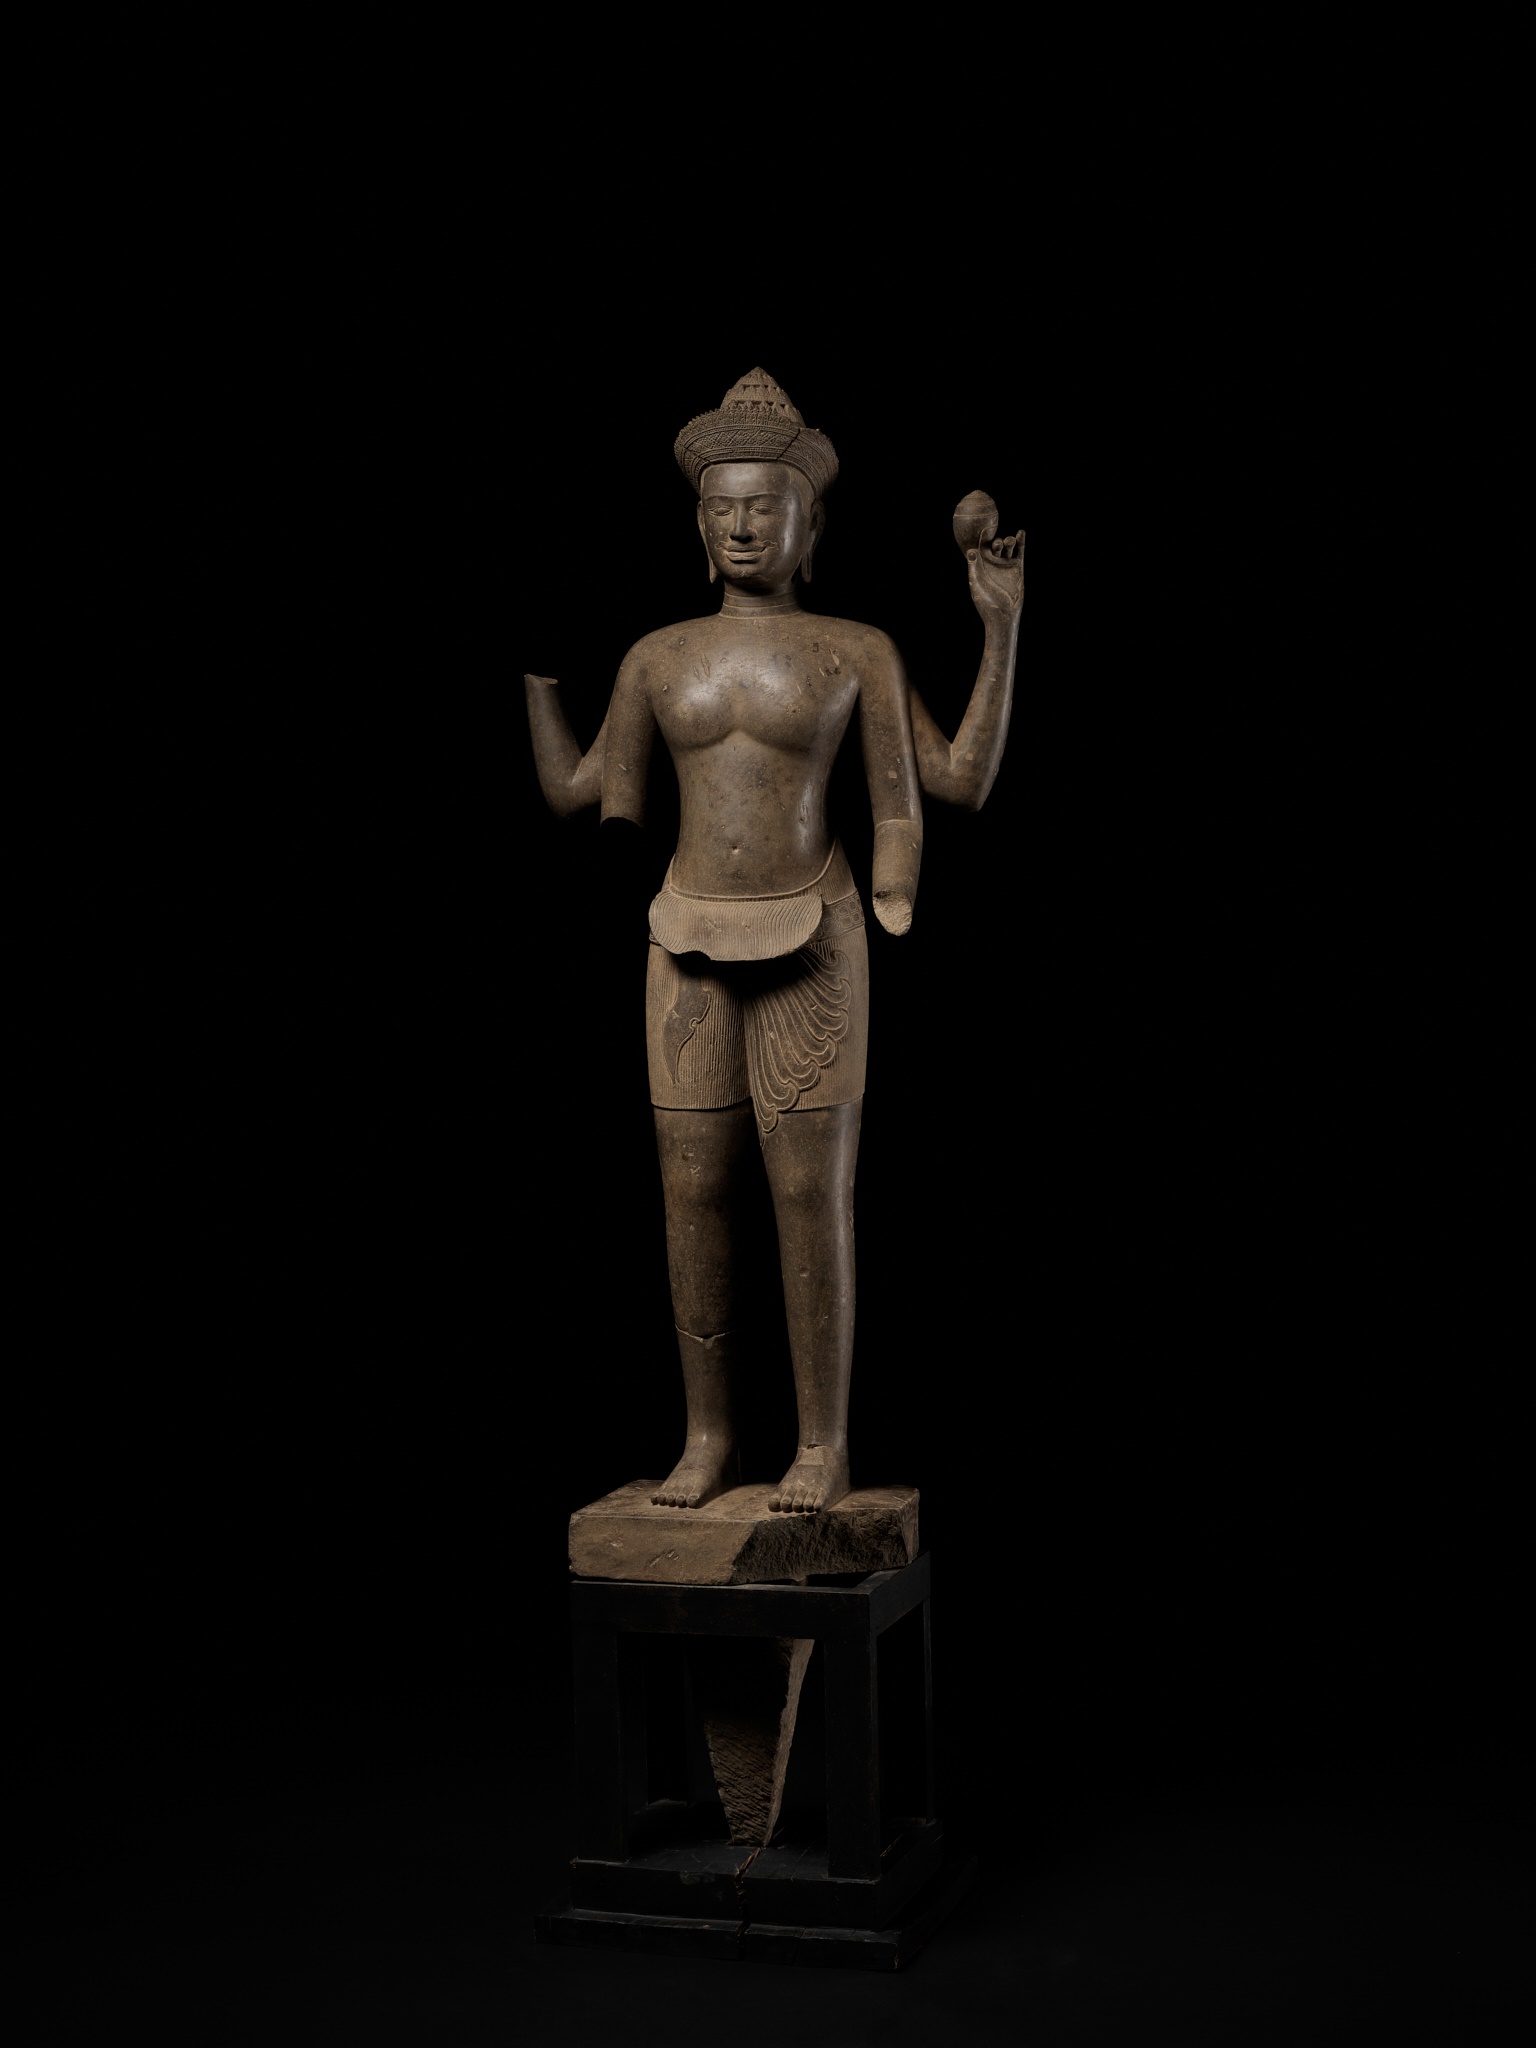 AN EXTREMELY RARE AND MONUMENTAL SANDSTONE STATUE OF VISHNU, ANGKOR PERIOD - Image 10 of 17